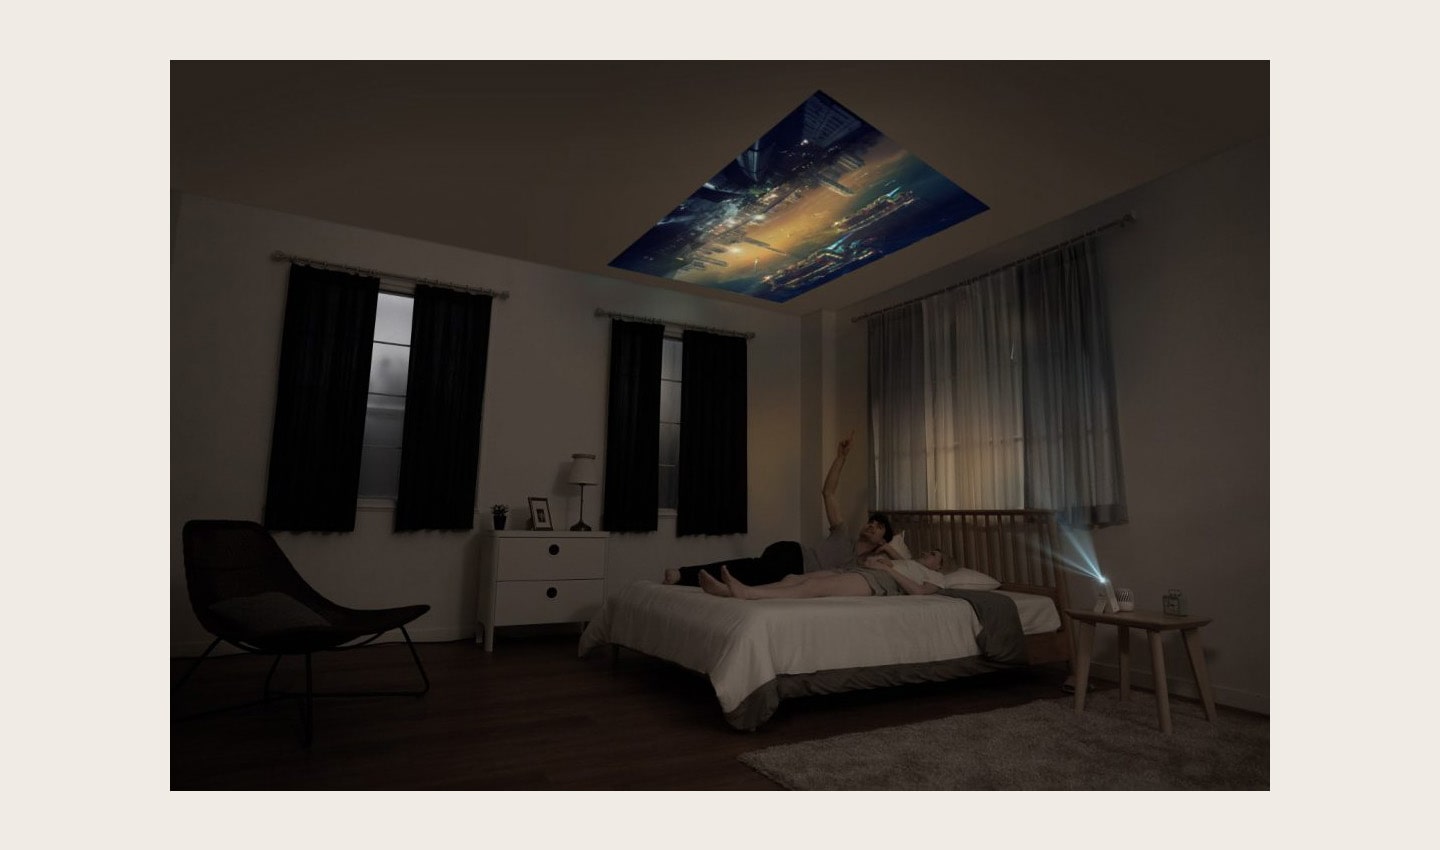 A couple lying in bed while watching a movie projected on the ceiling by the LG MiniBeam Projector